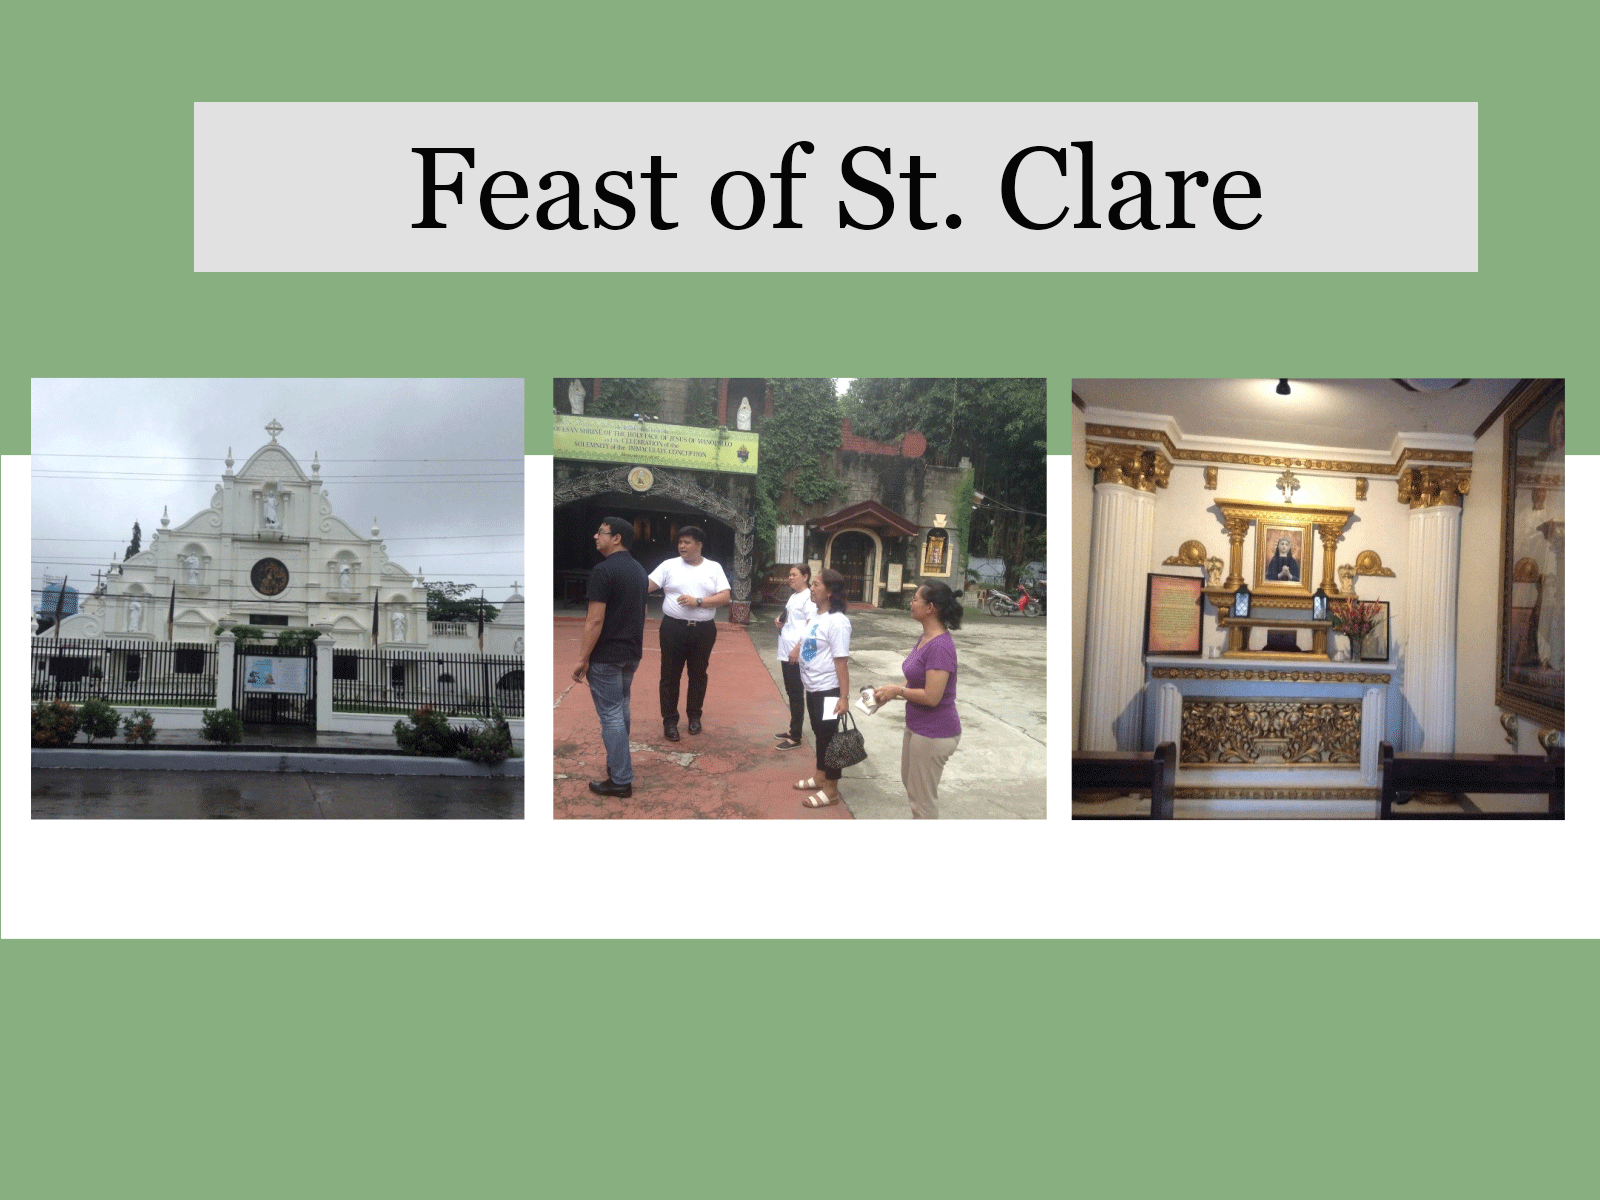 Feast of St. Clare